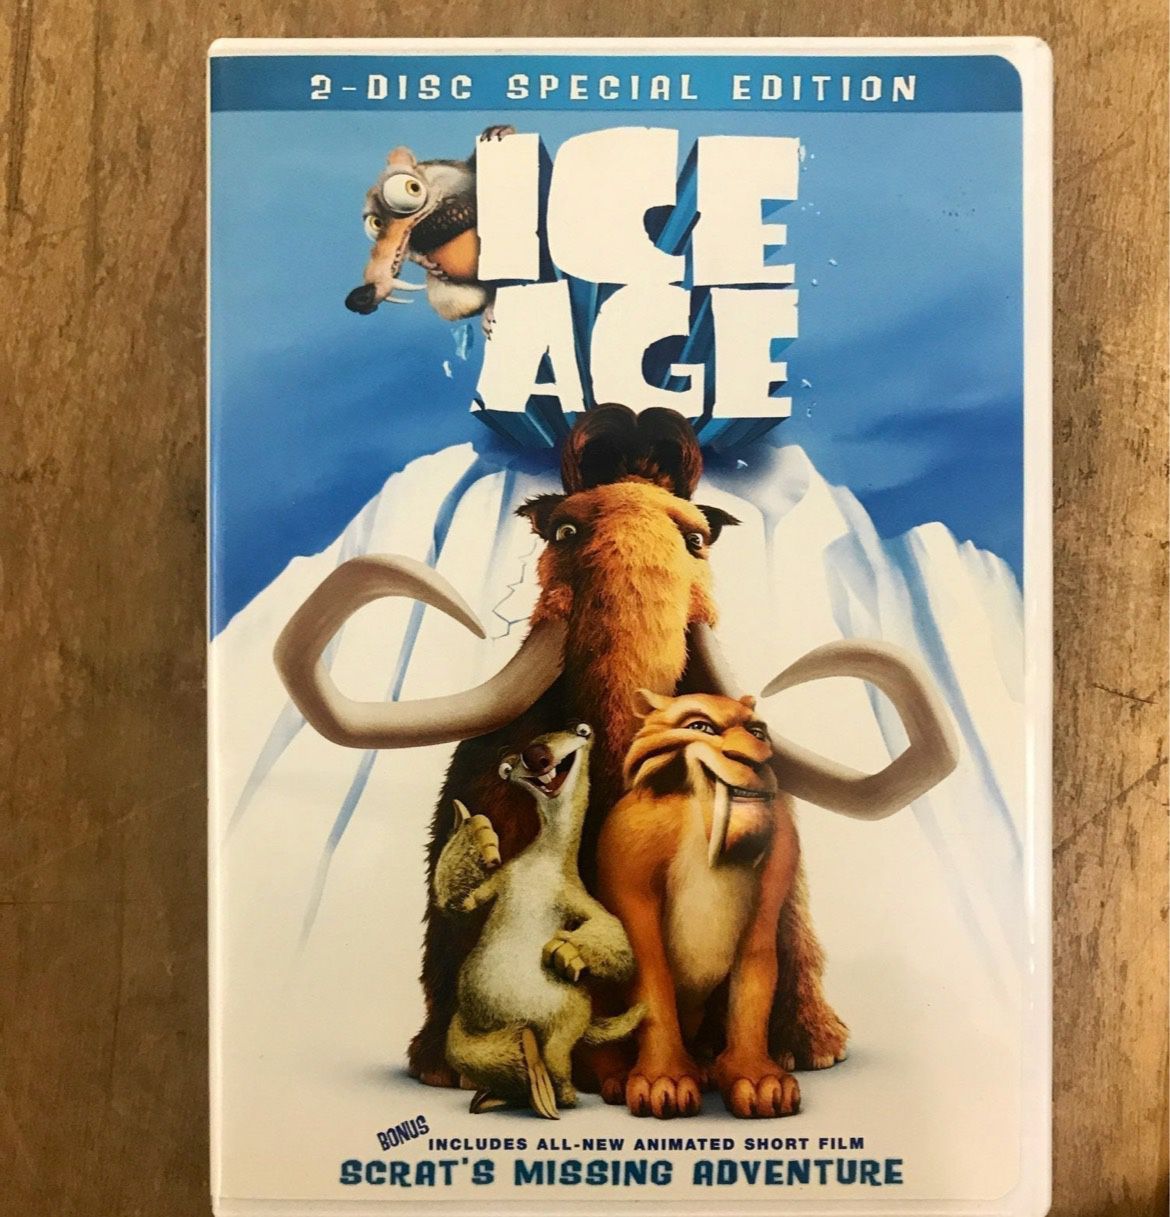 Ice Age DVD 2 Disc Special Edition Original 2002 Release Ray Romano, Denis Leary